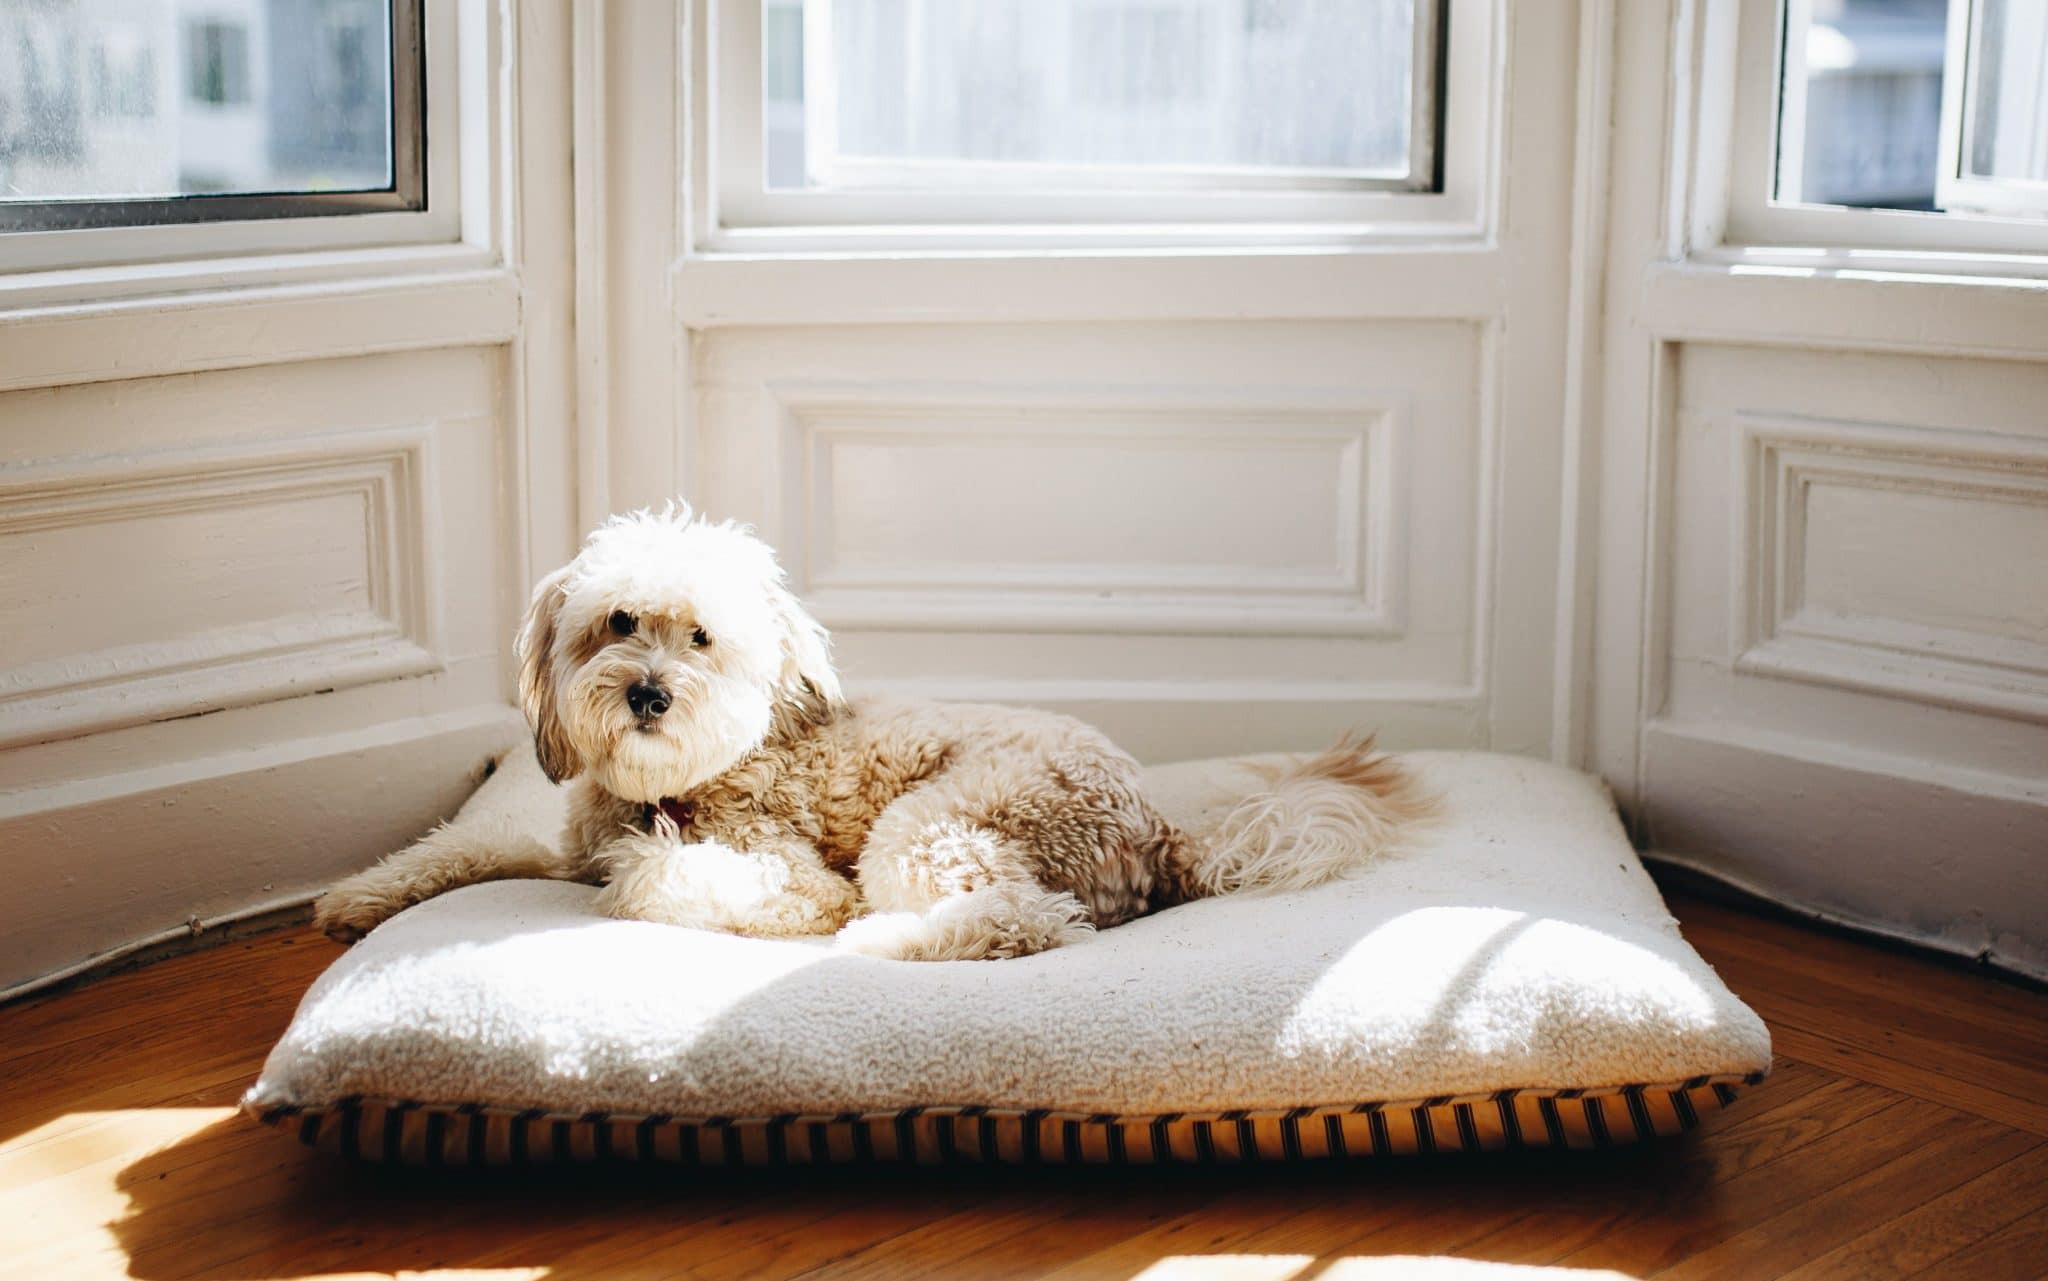 A Whoodle dog sitting on his bed in the window